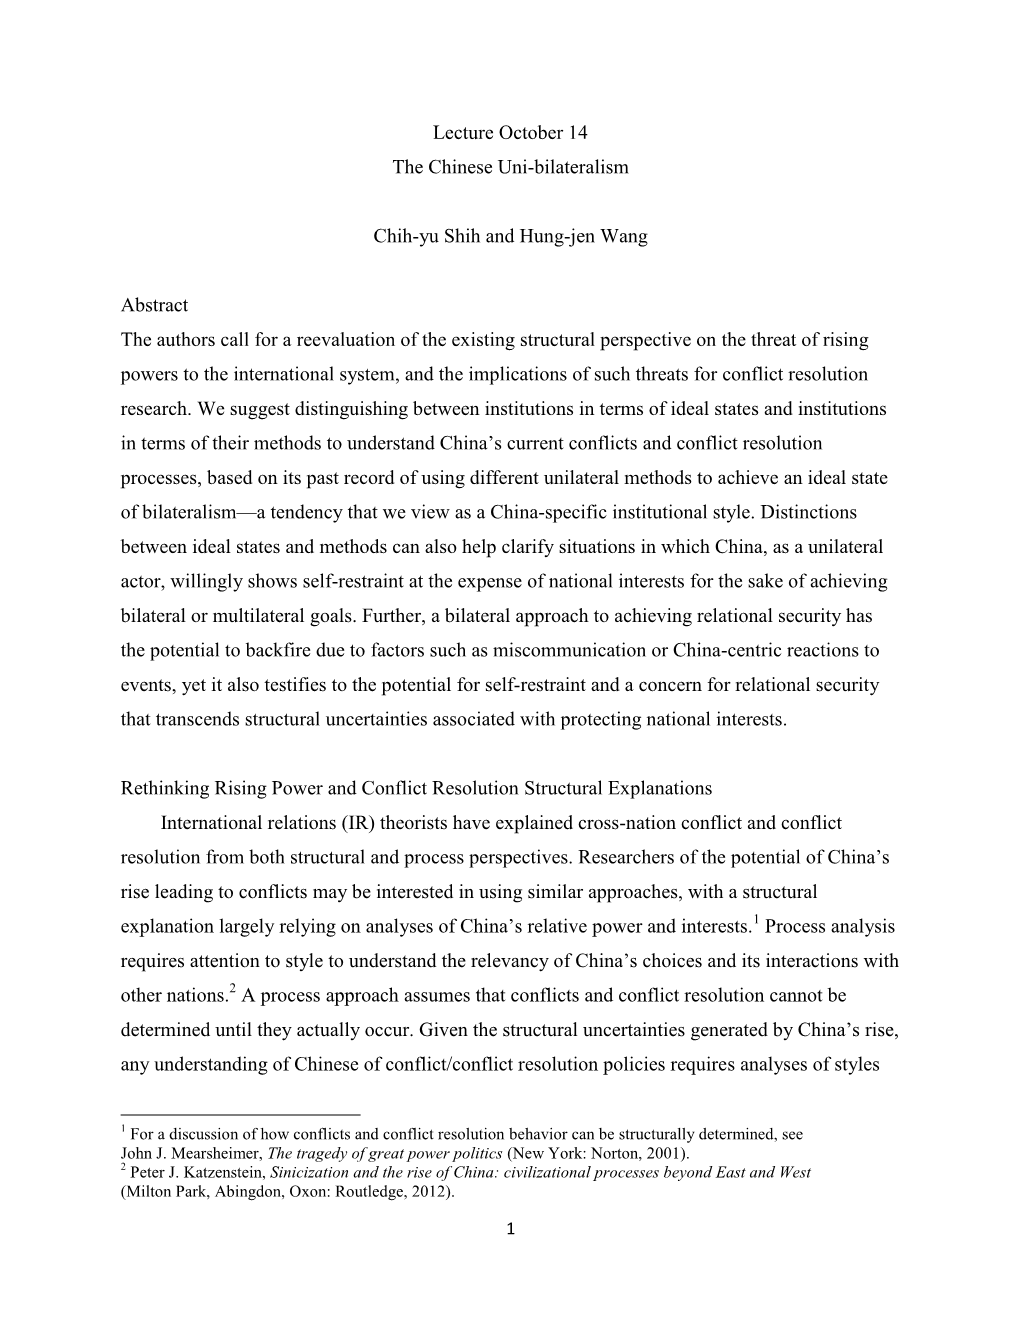 Lecture October 14 the Chinese Uni-Bilateralism Chih-Yu Shih And